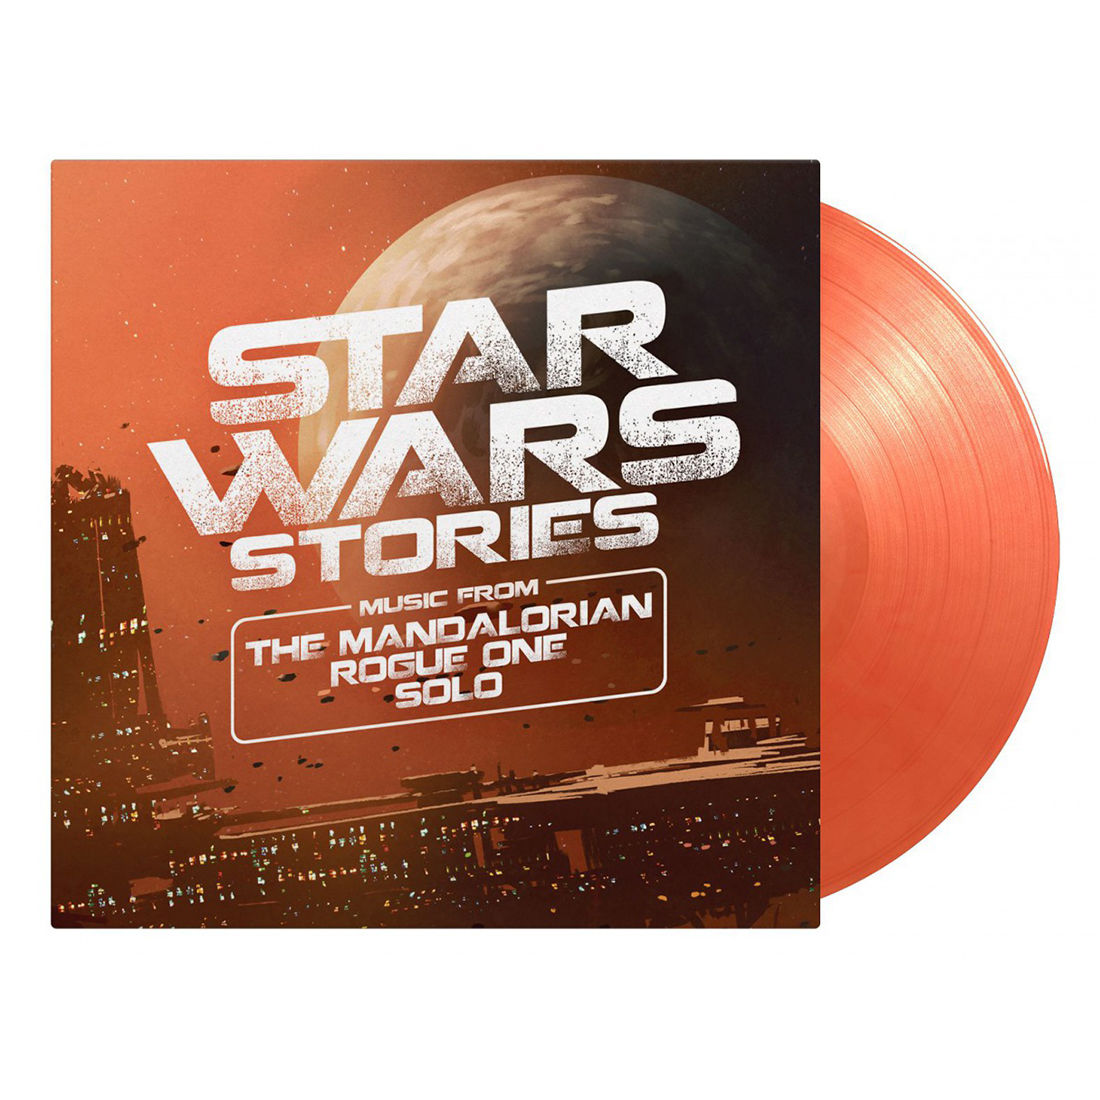 Original Soundtrack - Star Wars Stories - Music from The Mandalorian, Rouge One and Solo: Limited Edition Gatefold Amber Vinyl 2LP